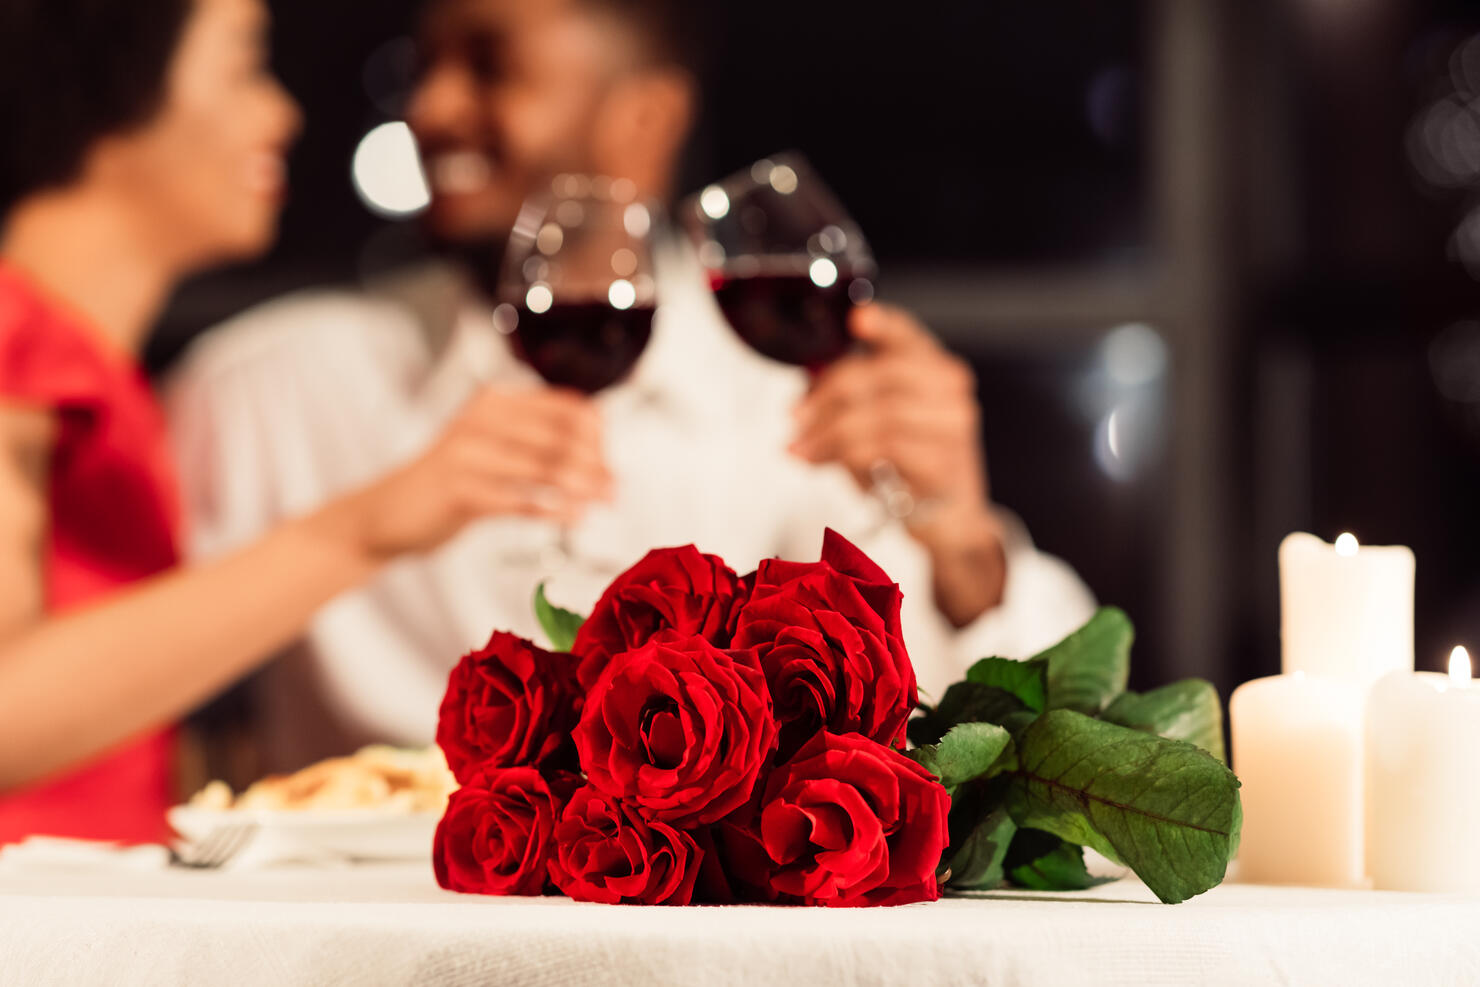 Roses Lying On Table, Unrecognizable Spouses Drinking Wine In Restaurant